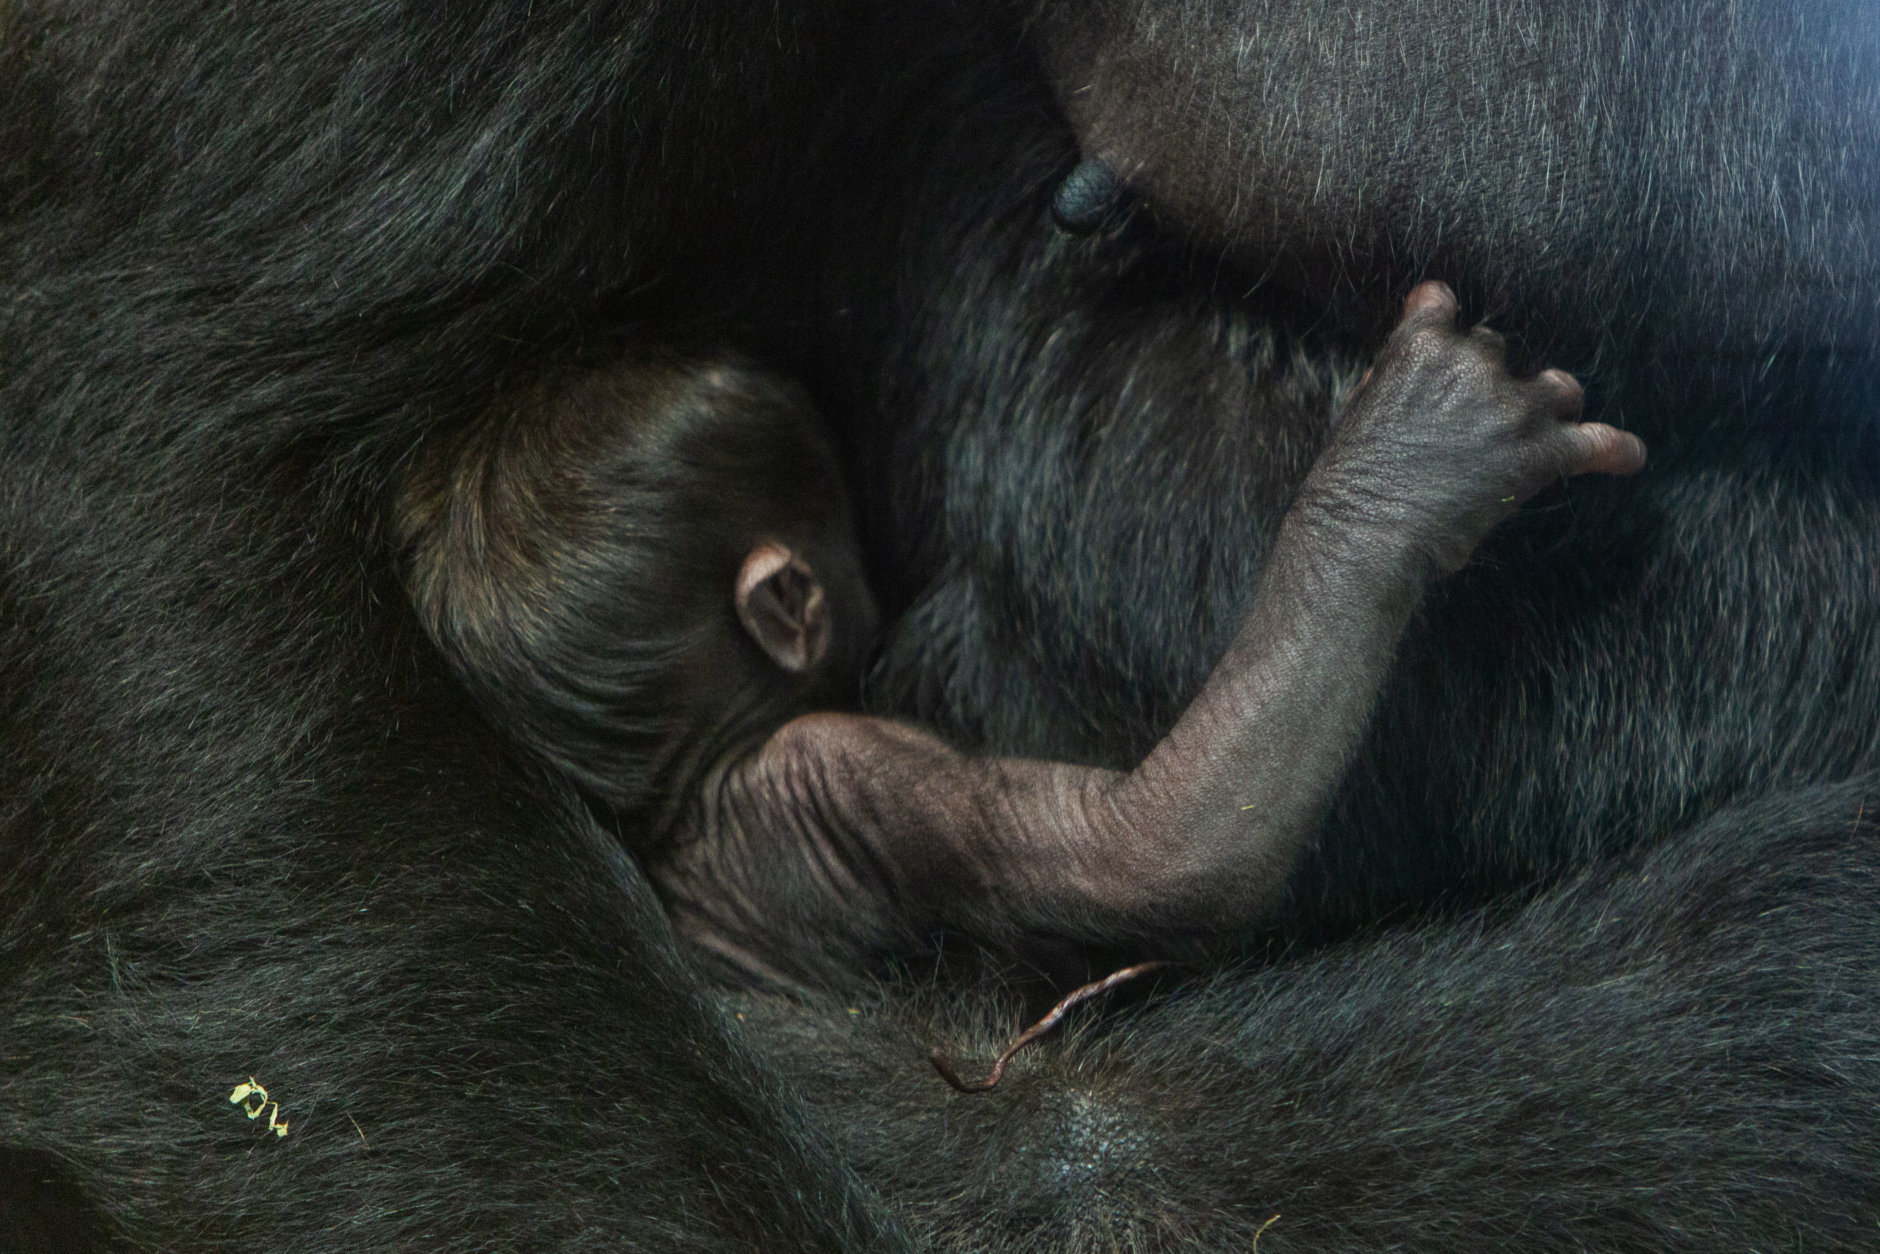 Calaya and her infant Moke in the Great Ape House at the Smithsonian’s National Zoo. (Roshan Patel, Smithsonian’s National Zoo)